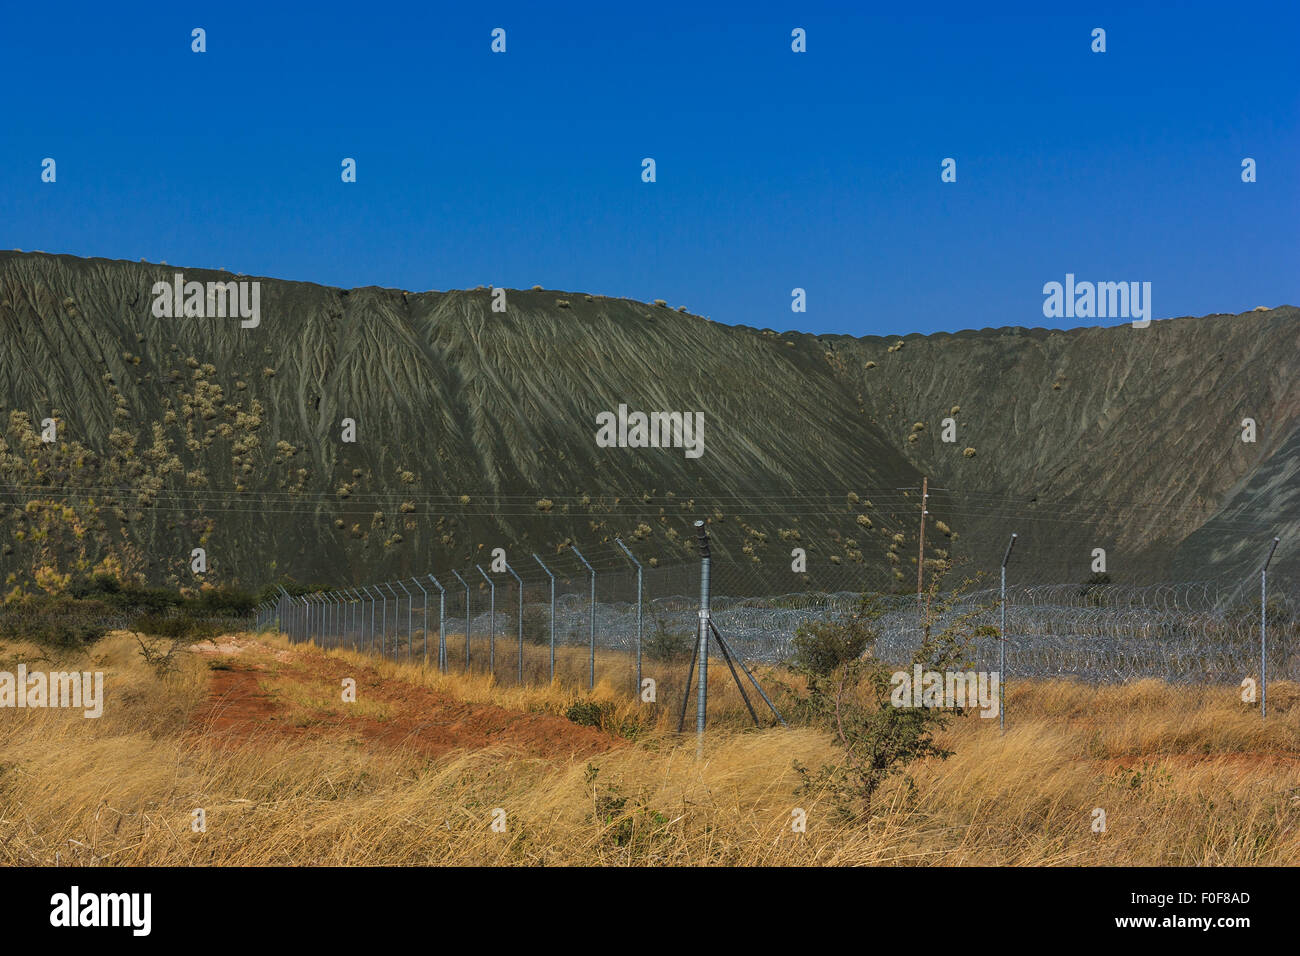 Diamond mine in mountain area Botswana, Africa. Area is fenced with barb wire. Stock Photo